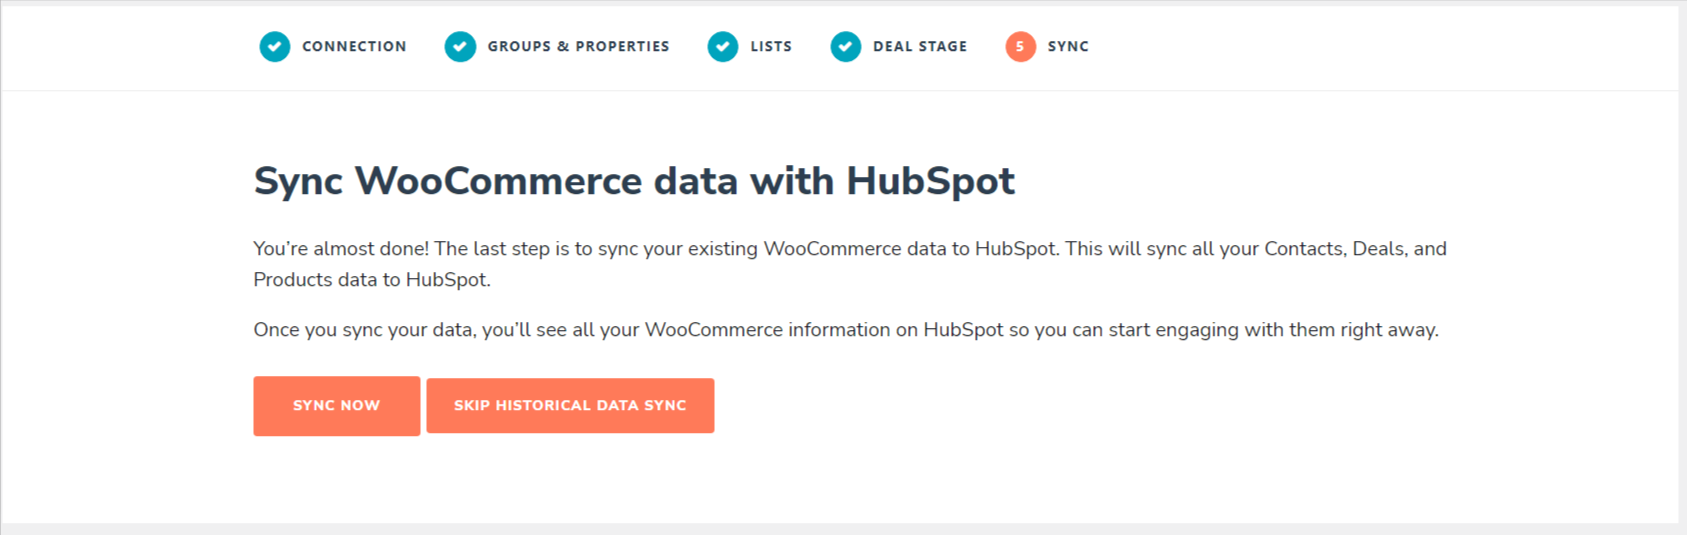 WooCommerce data with hubspot 